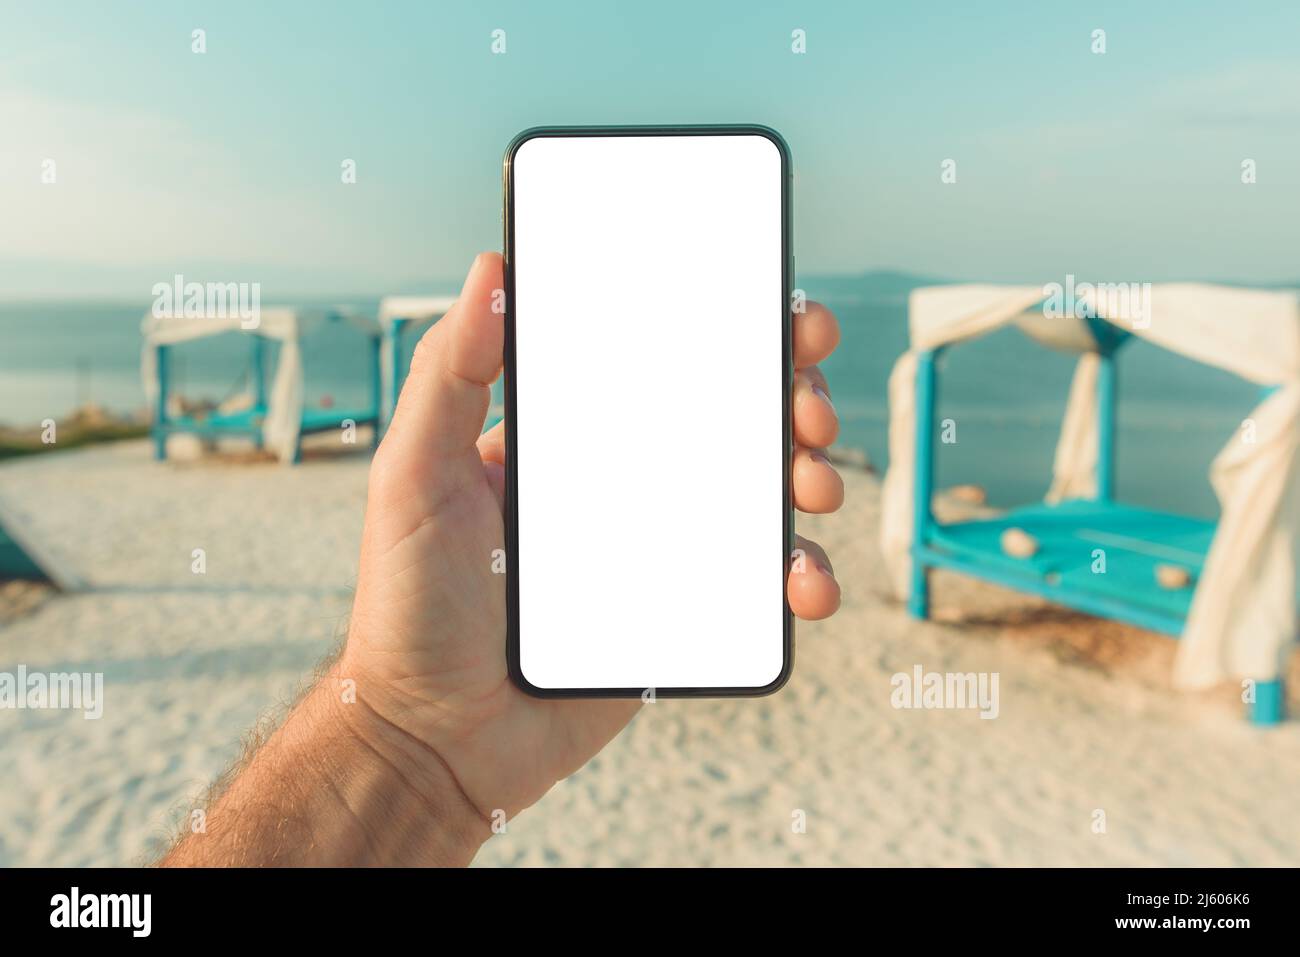 Mobile smart phone with blank mockup template screen in male hand, beach pergola in background, selective focus Stock Photo